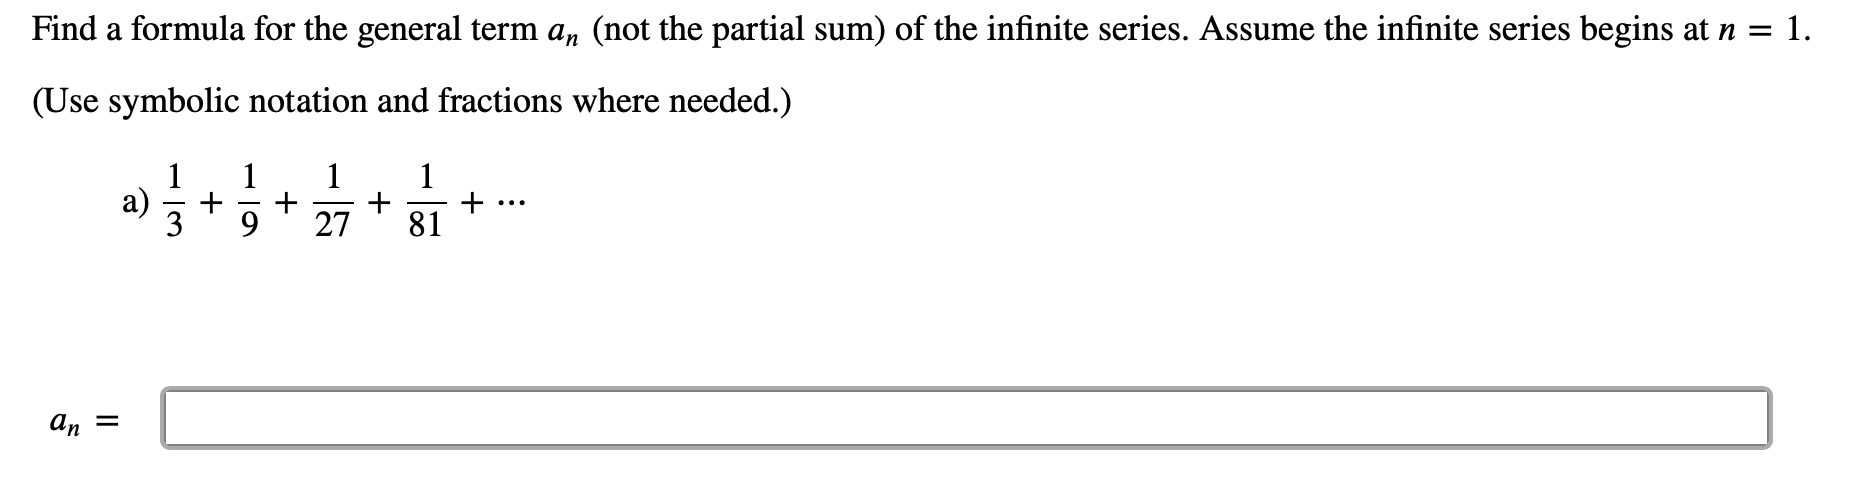 Find a formula for the general term a, (not the partial sum) of the infinite series. Assume the infinite series begins at n = 1.
(Use symbolic notation and fractions where needed.)
1
a)
3
1
1
+
27
1
...
81
an
II
